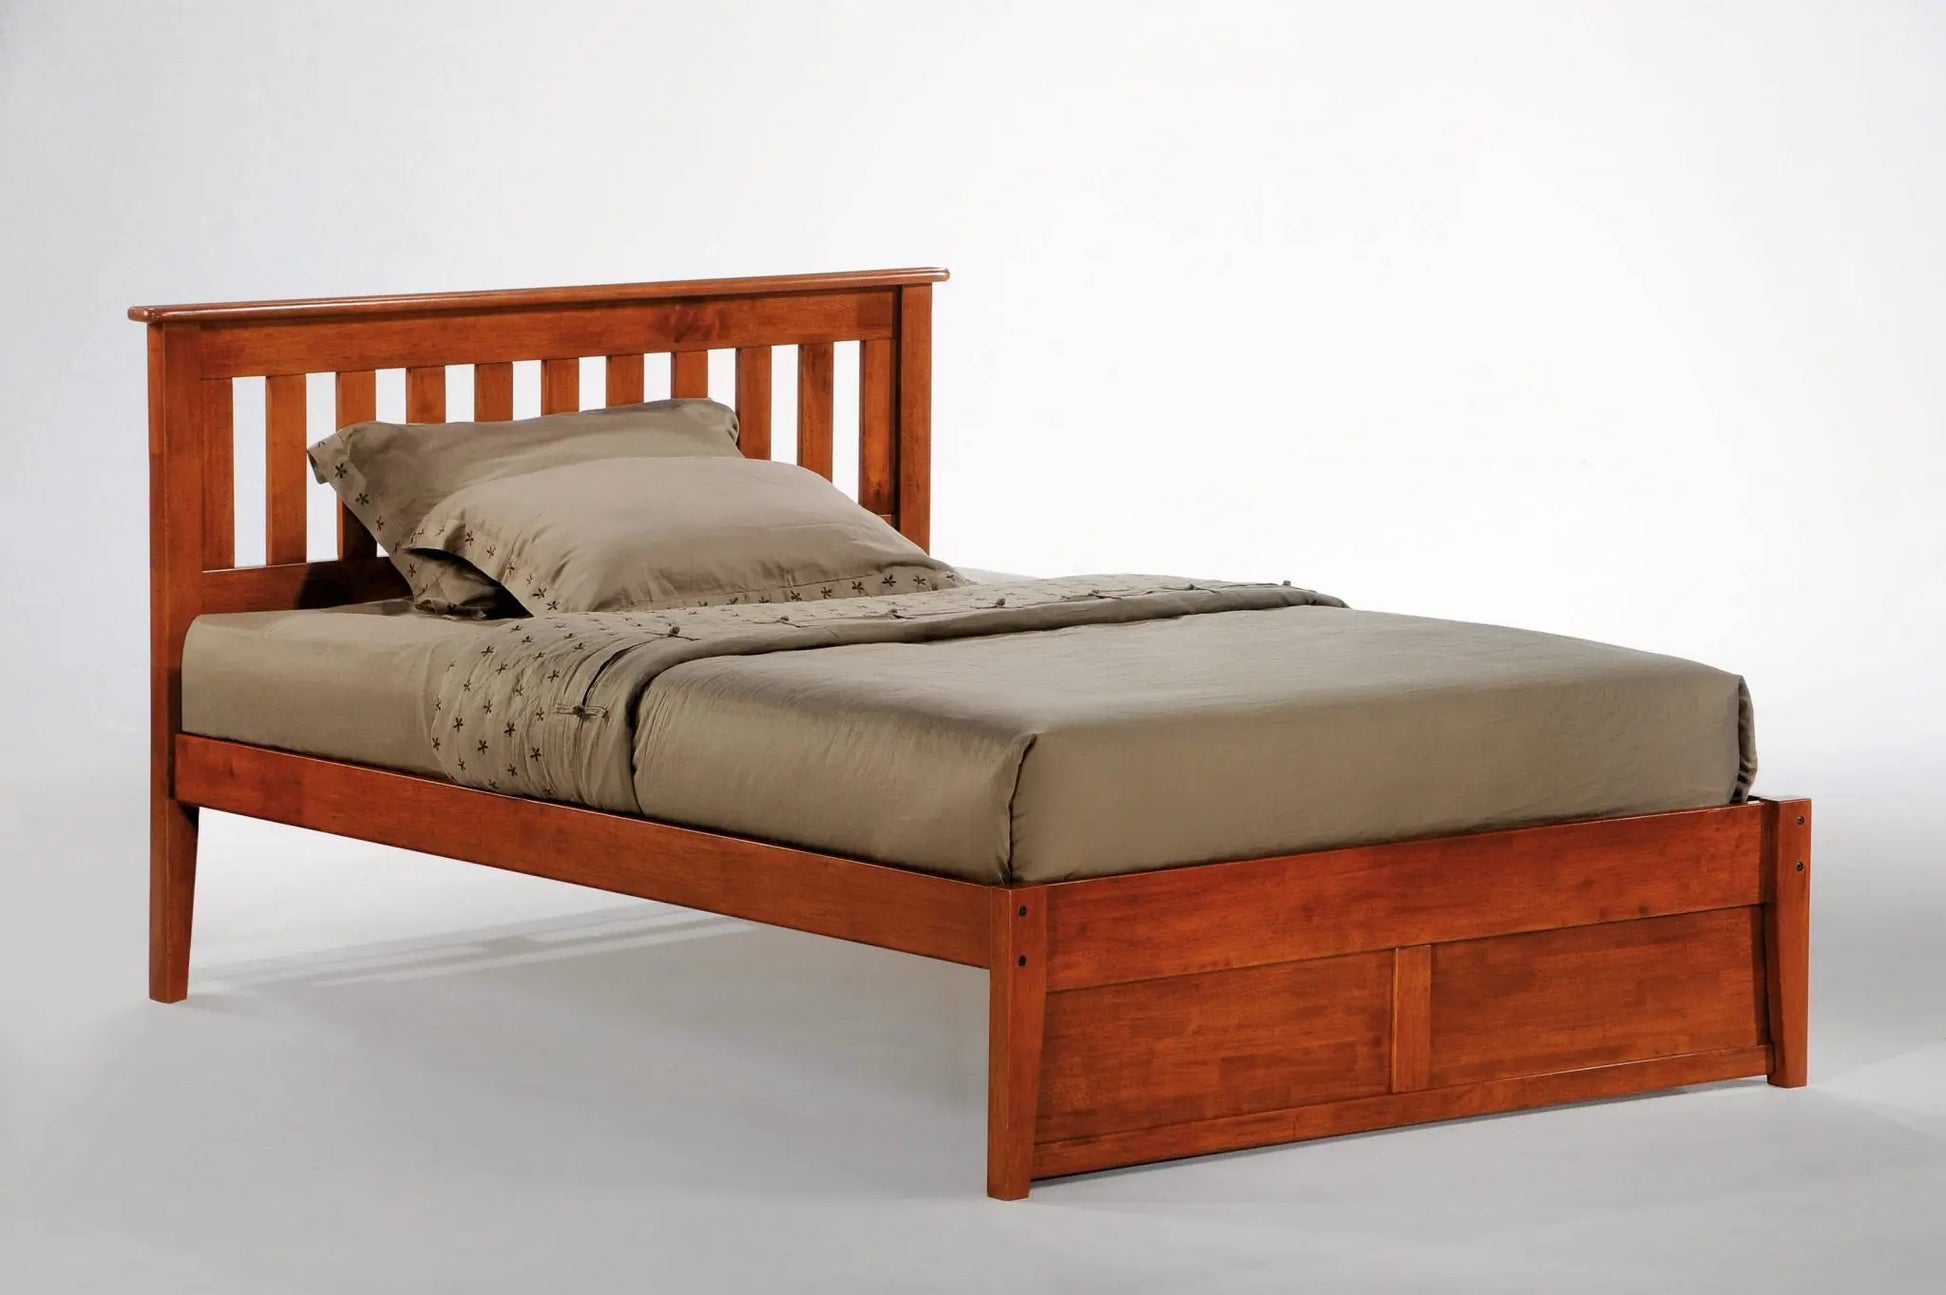 ROSEMARY BED night and day furniture